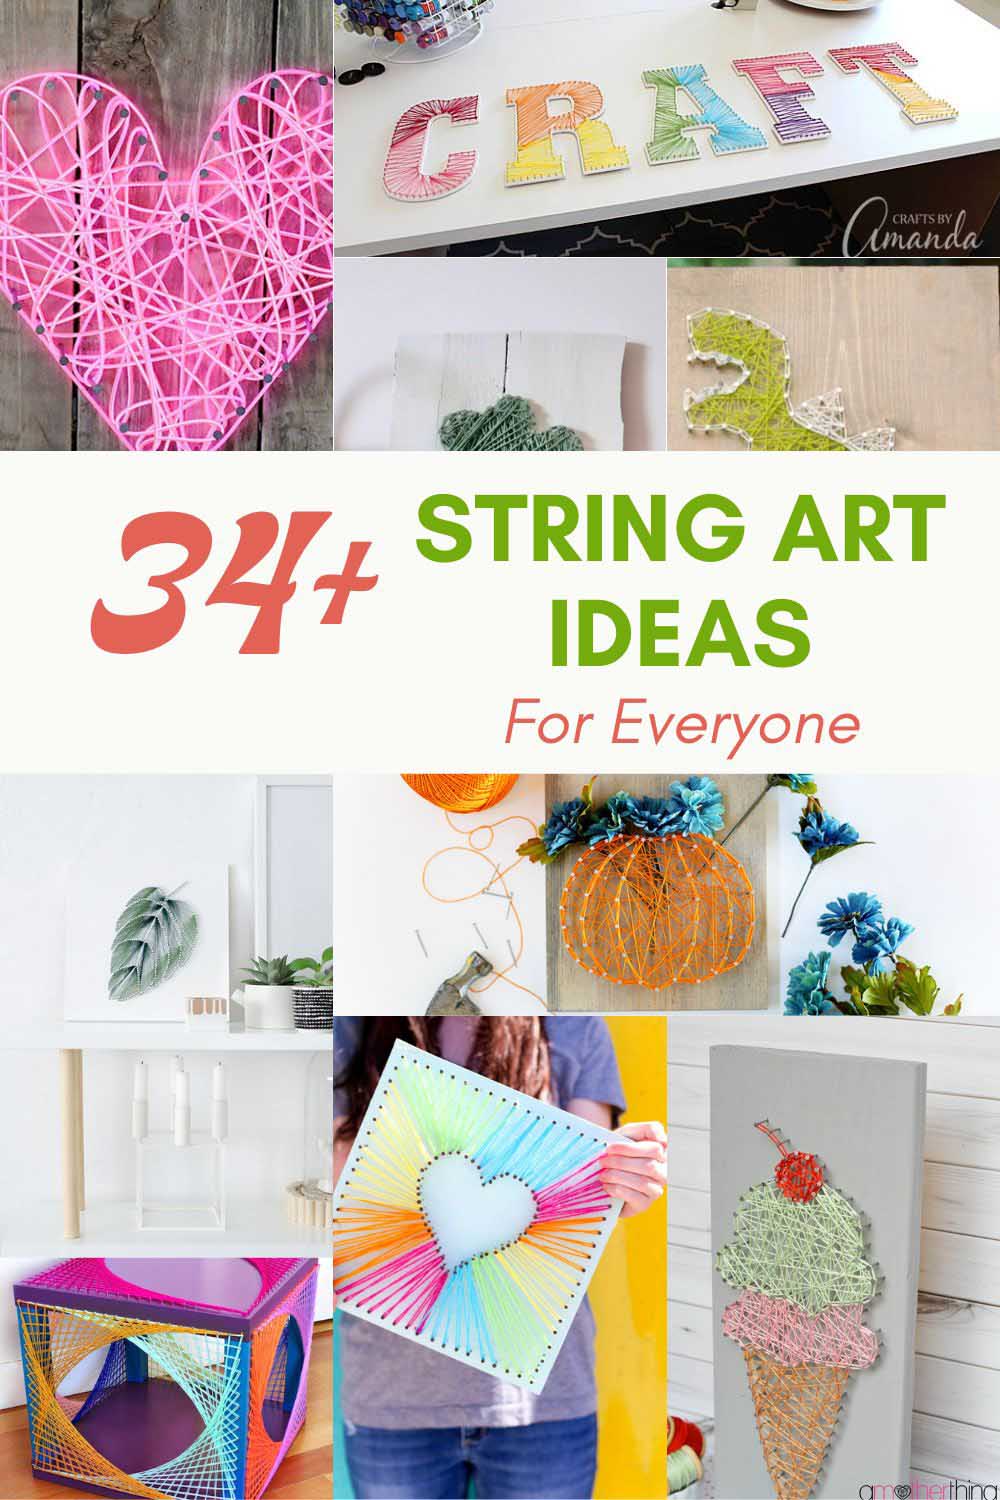 34 String Art Ideas That Charm and Delight: Creating Magic with